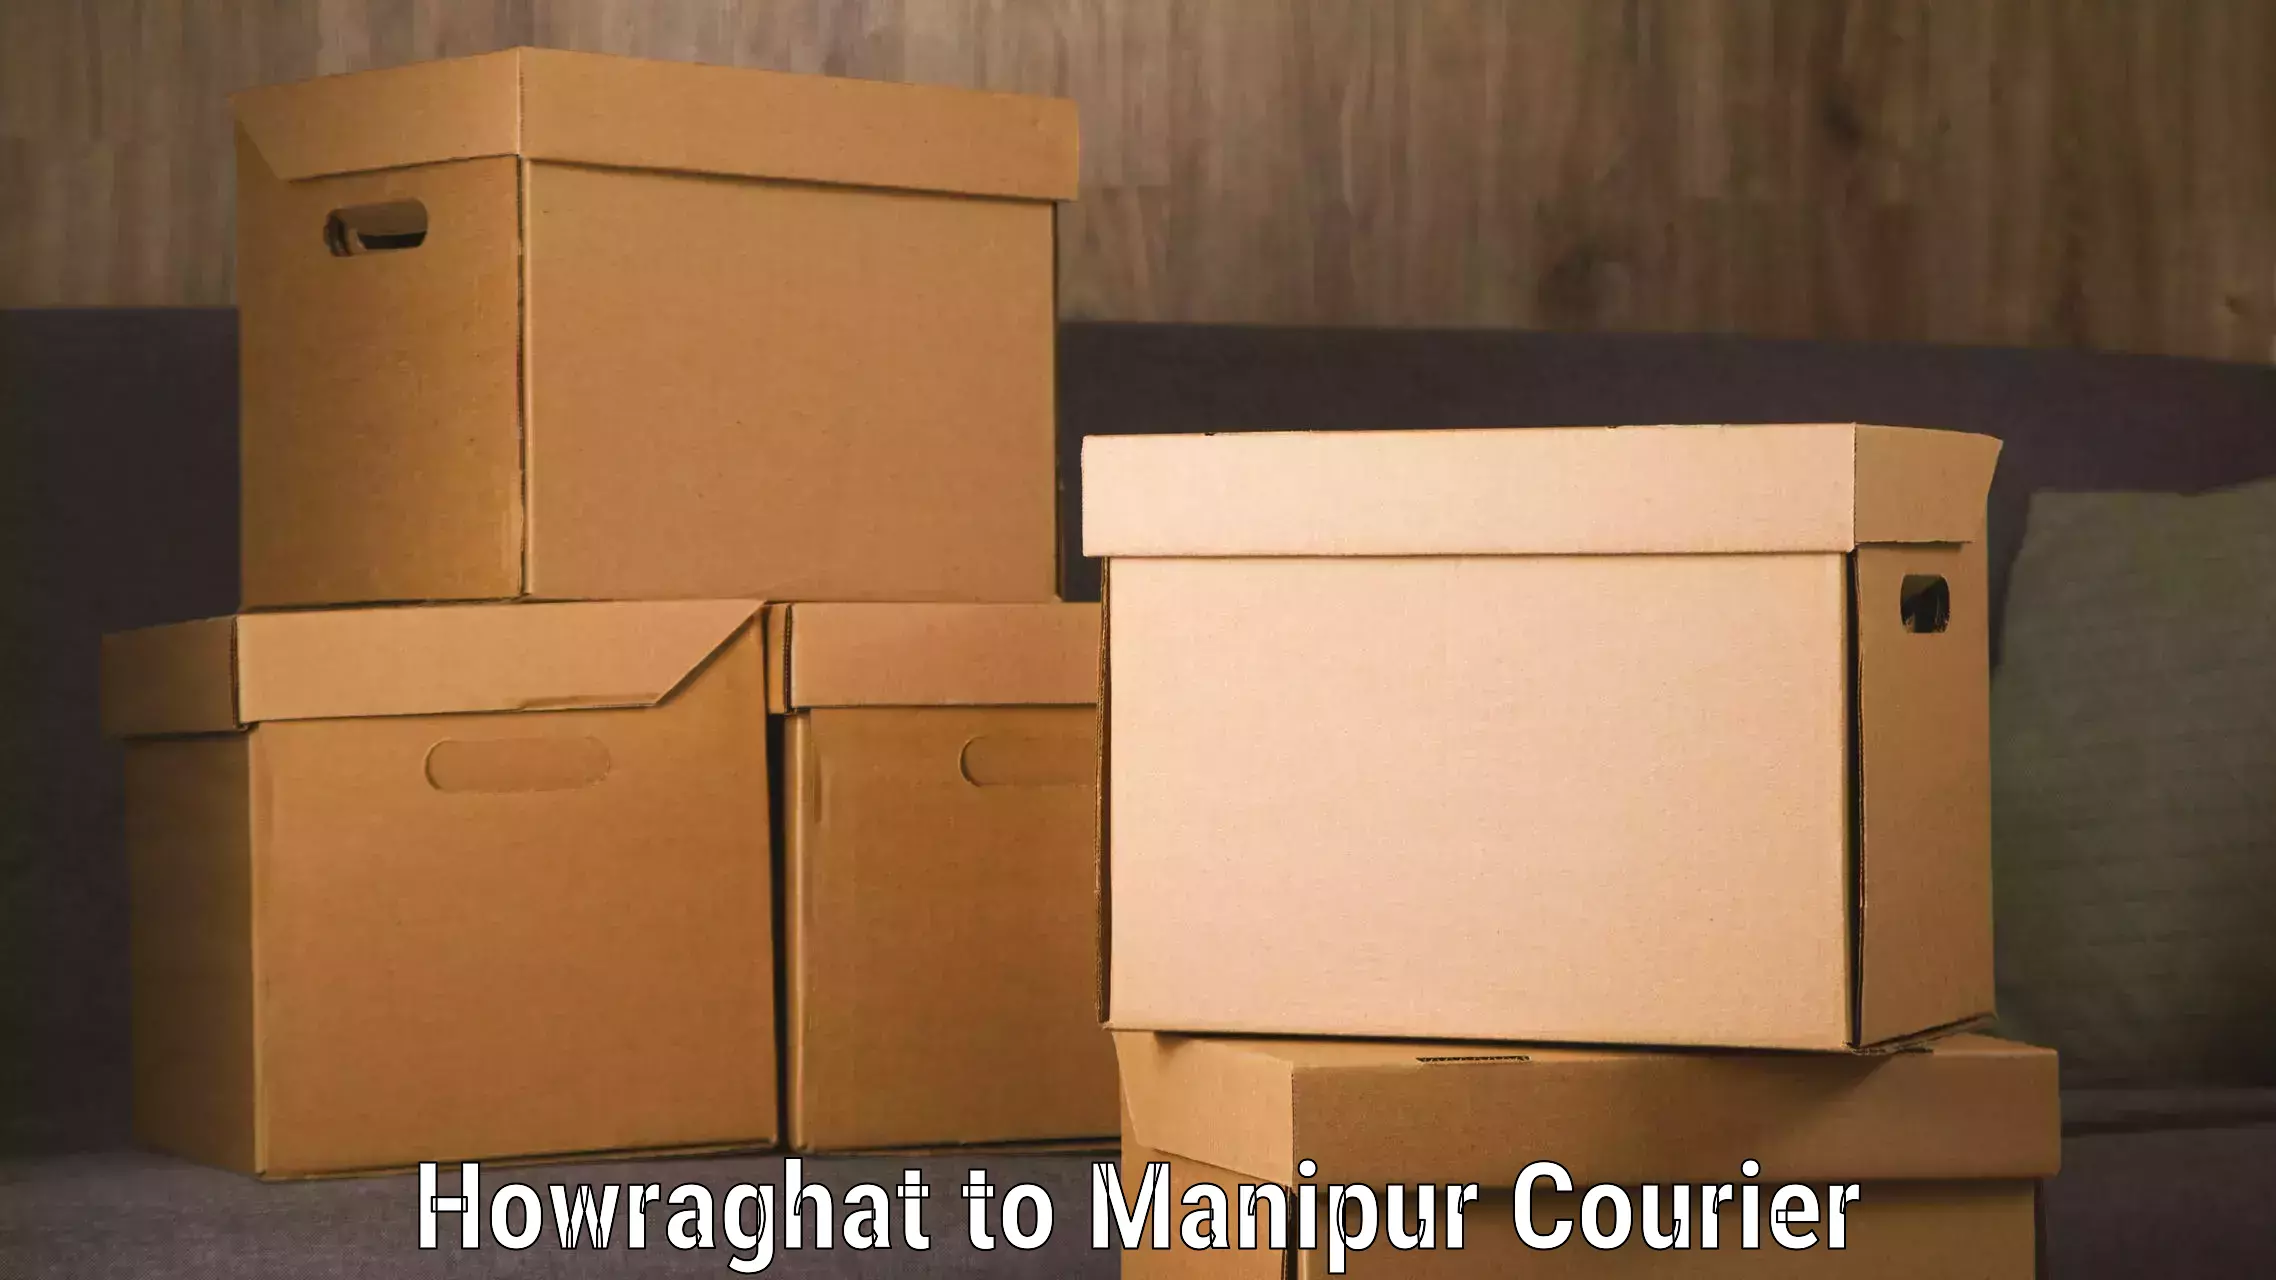 Hassle-free luggage shipping Howraghat to Imphal